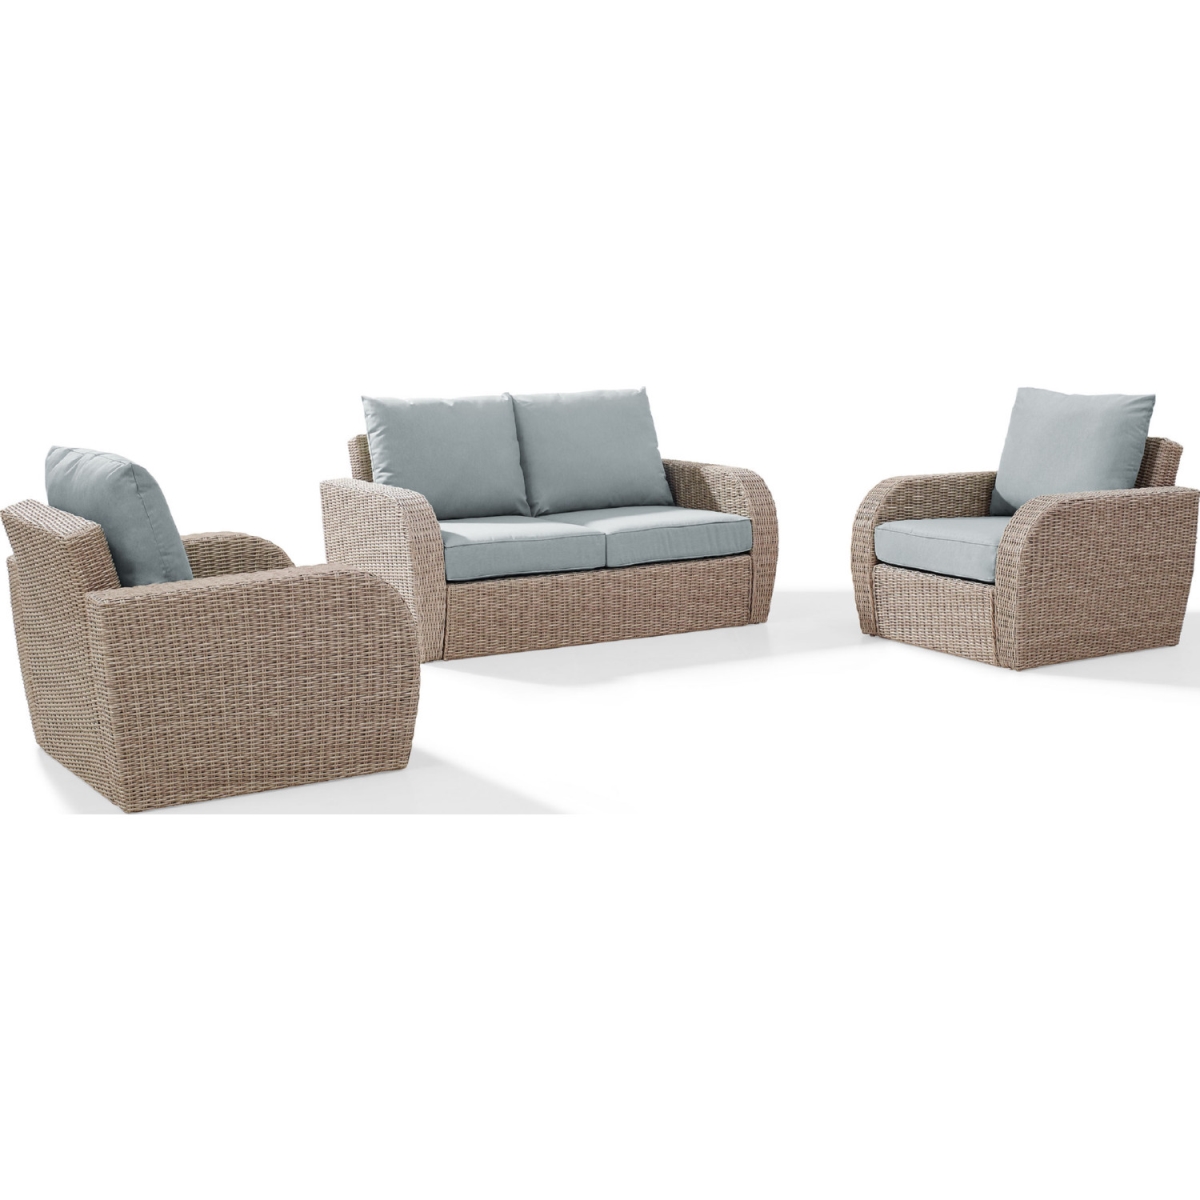 Ko70134wh-mi 3 Piece St. Augustine Outdoor Wicker Seating Set With Mist Cushion - Loveseat, Two Outdoor Chairs